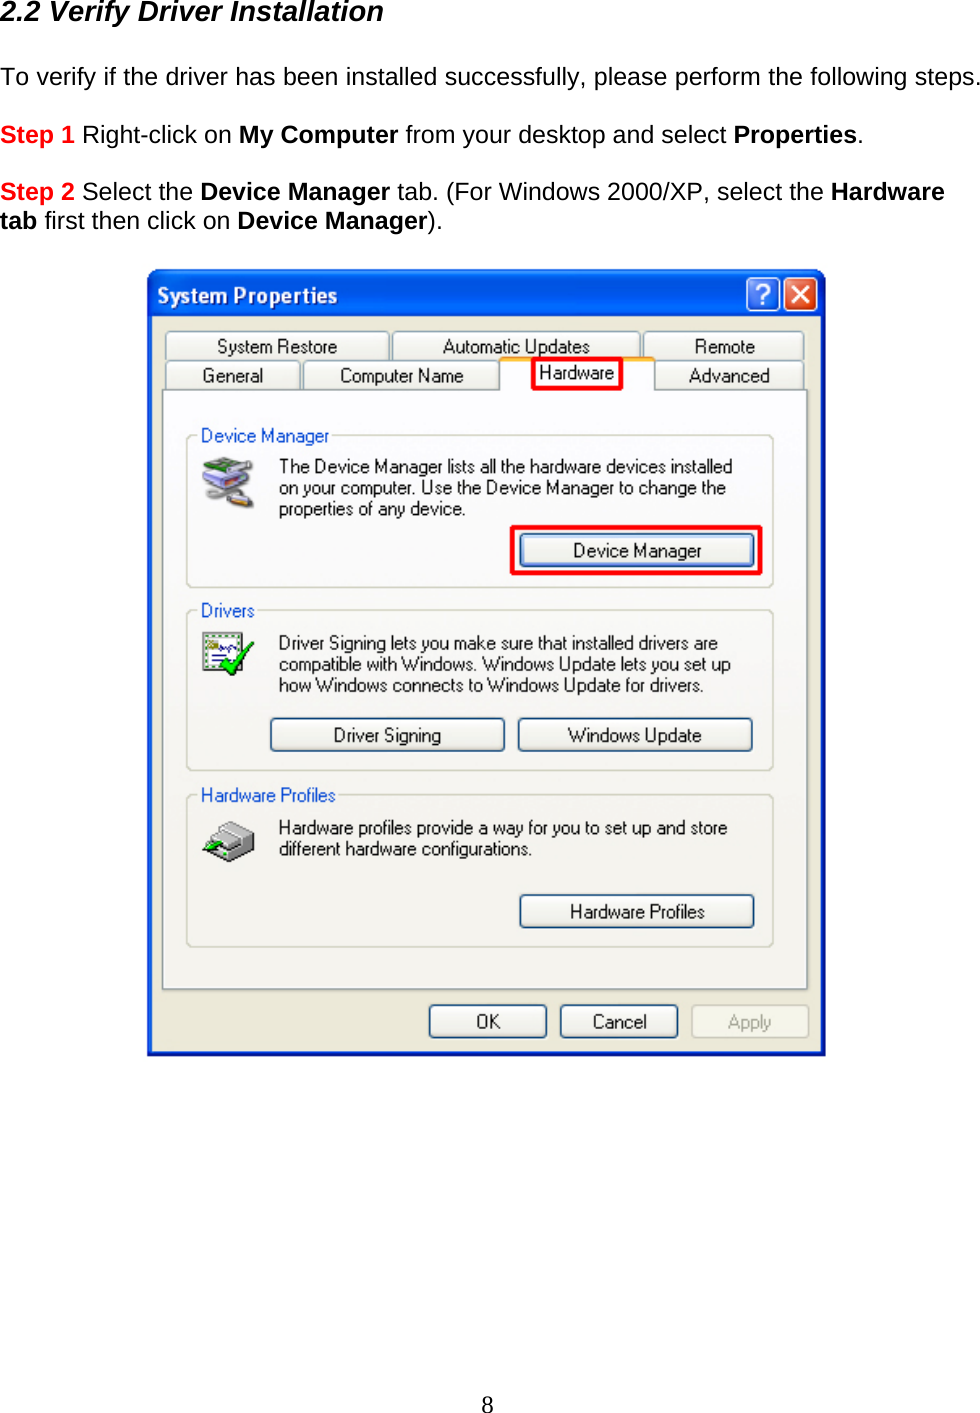 2.2 Verify Driver Installation  To verify if the driver has been installed successfully, please perform the following steps.  Step 1 Right-click on My Computer from your desktop and select Properties.  Step 2 Select the Device Manager tab. (For Windows 2000/XP, select the Hardware tab first then click on Device Manager).            8 